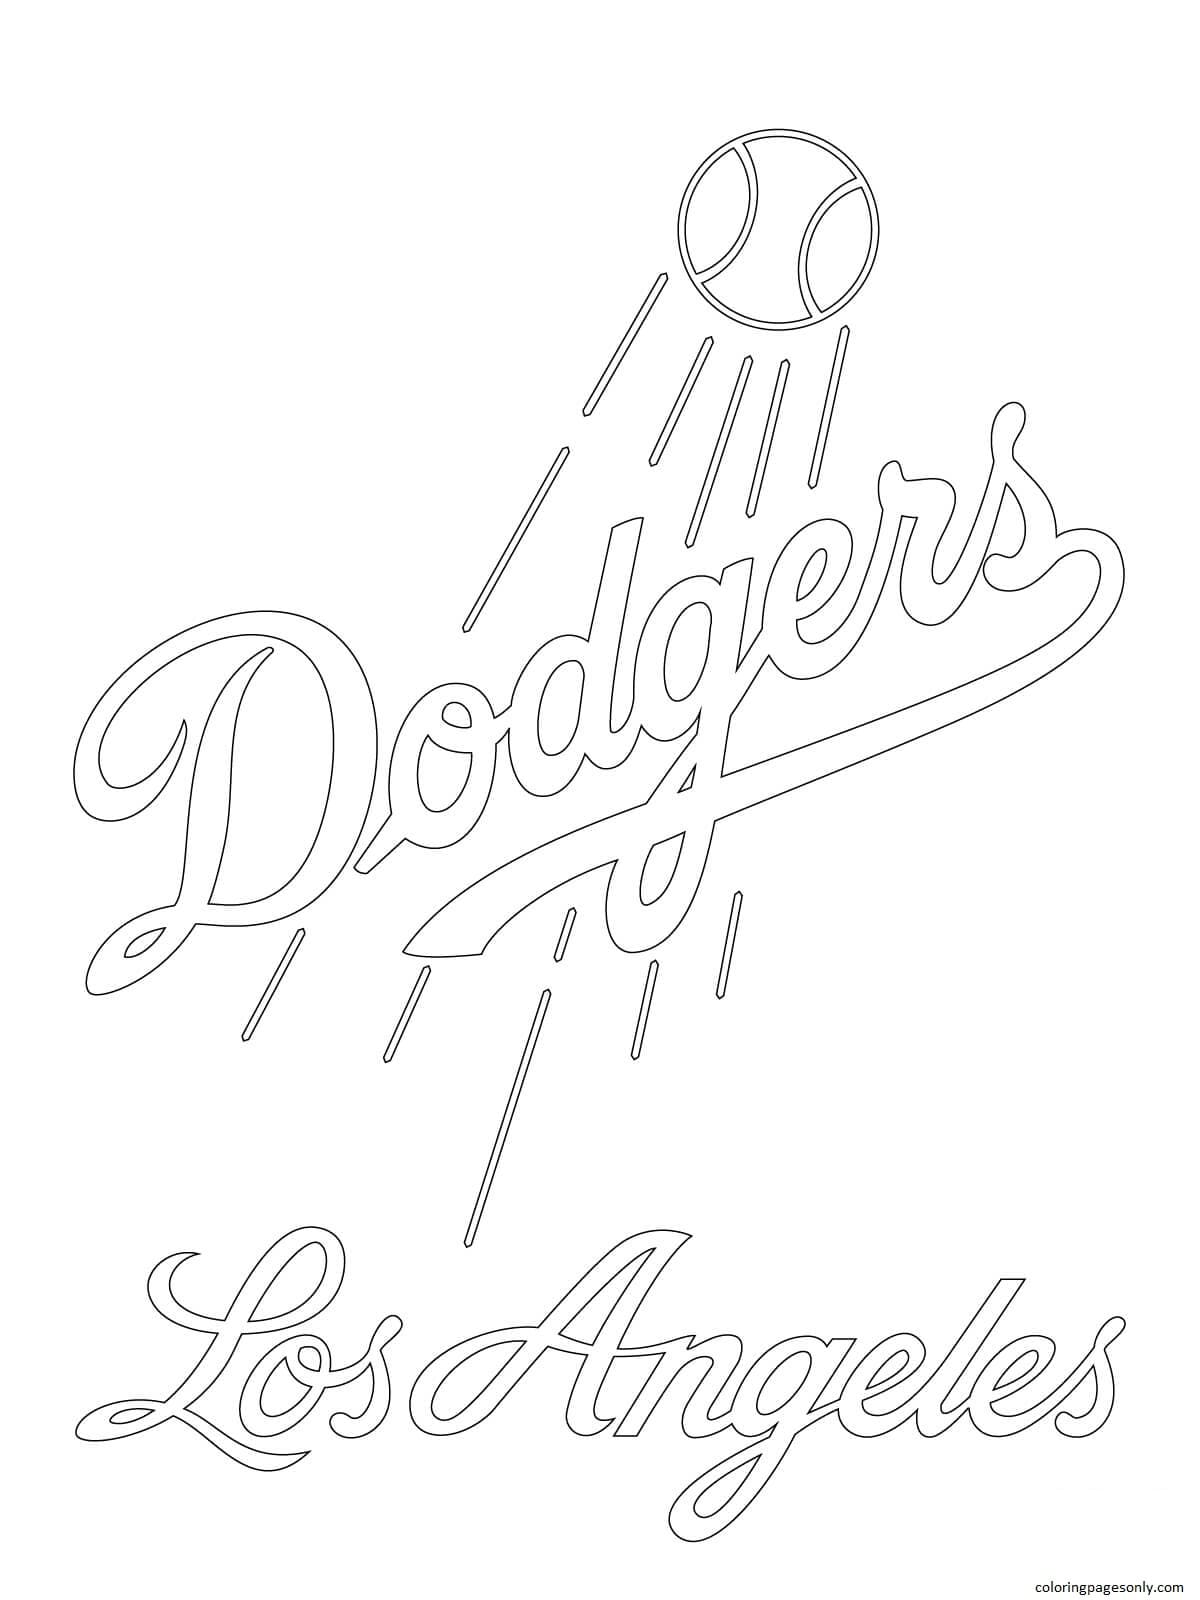 Los Angeles Dodgers Logo Coloring Page